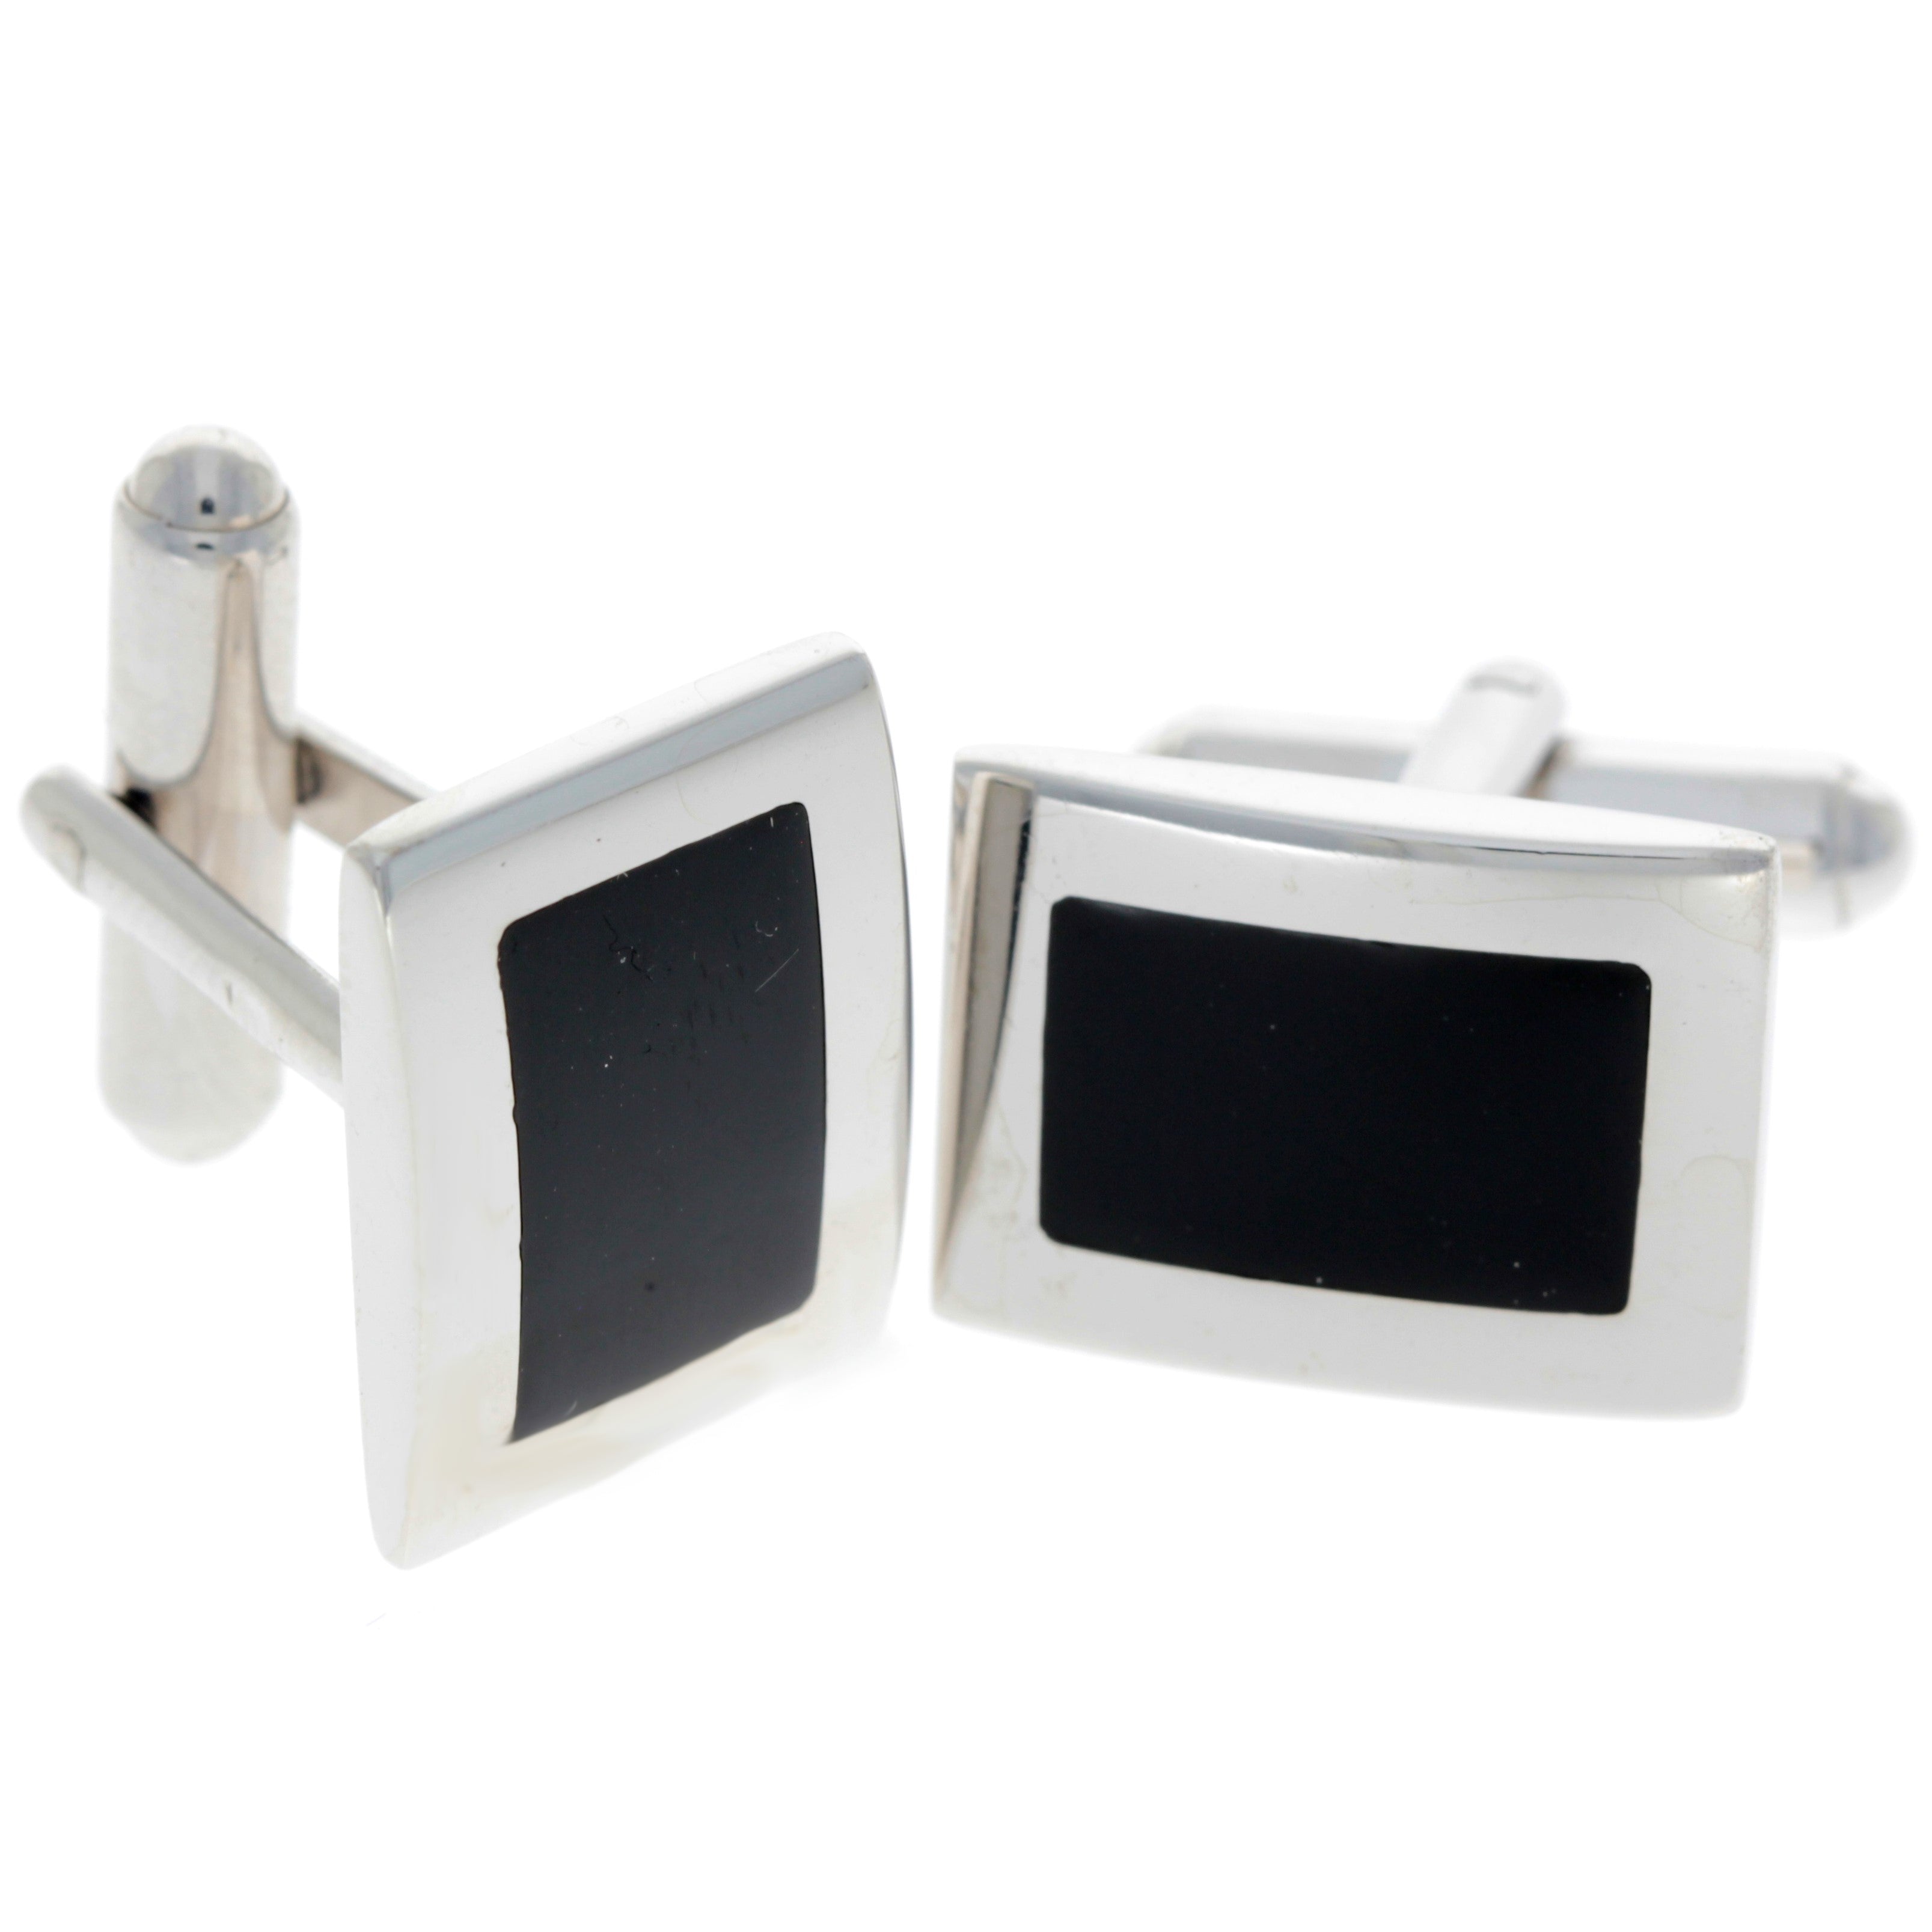 925 Sterling Silver & Baltic Amber Classic Cufflinks - AAC005